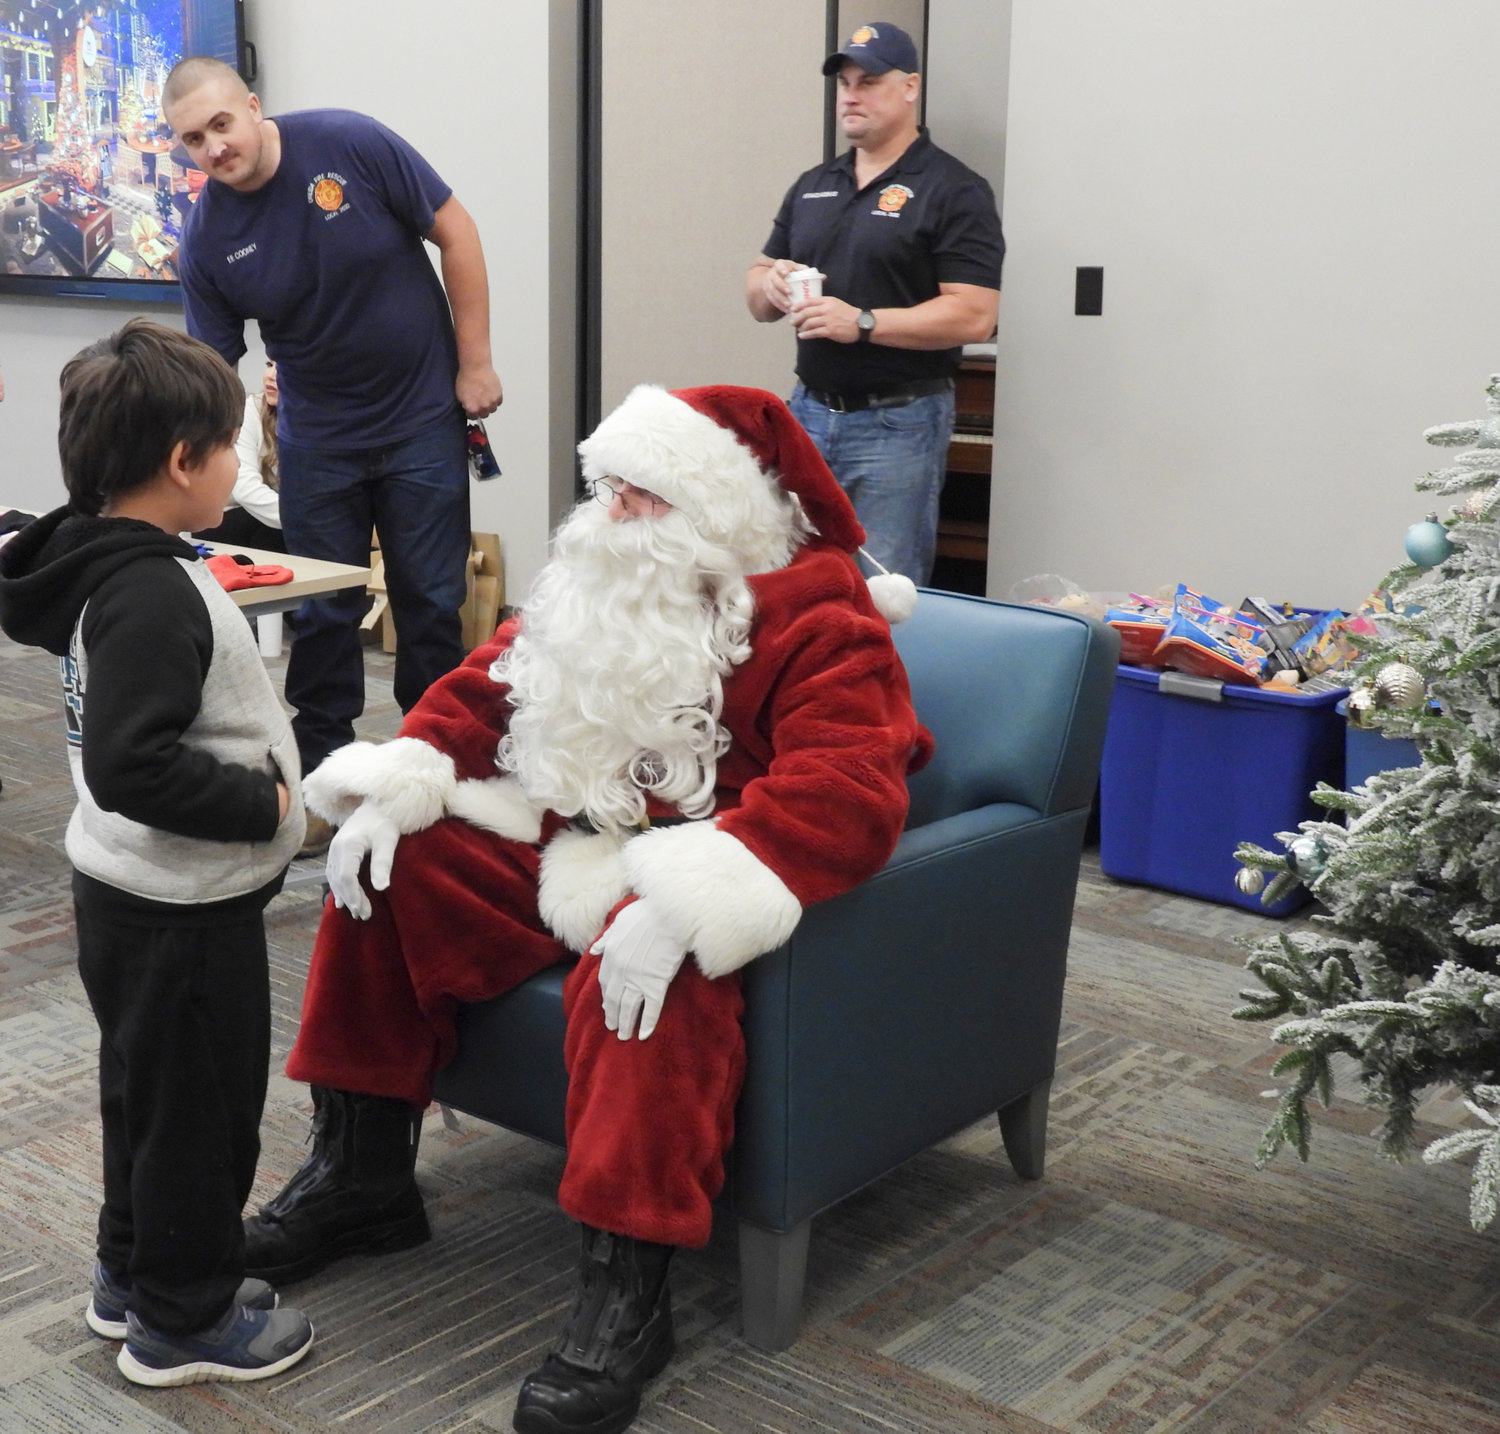 The Oneida Fire Department brings a little Christmas cheer to area children with the help of Santa Claus, listening to their Christmas wishes and giving them a toy and some treats to take home on Saturday, Dec. 3.